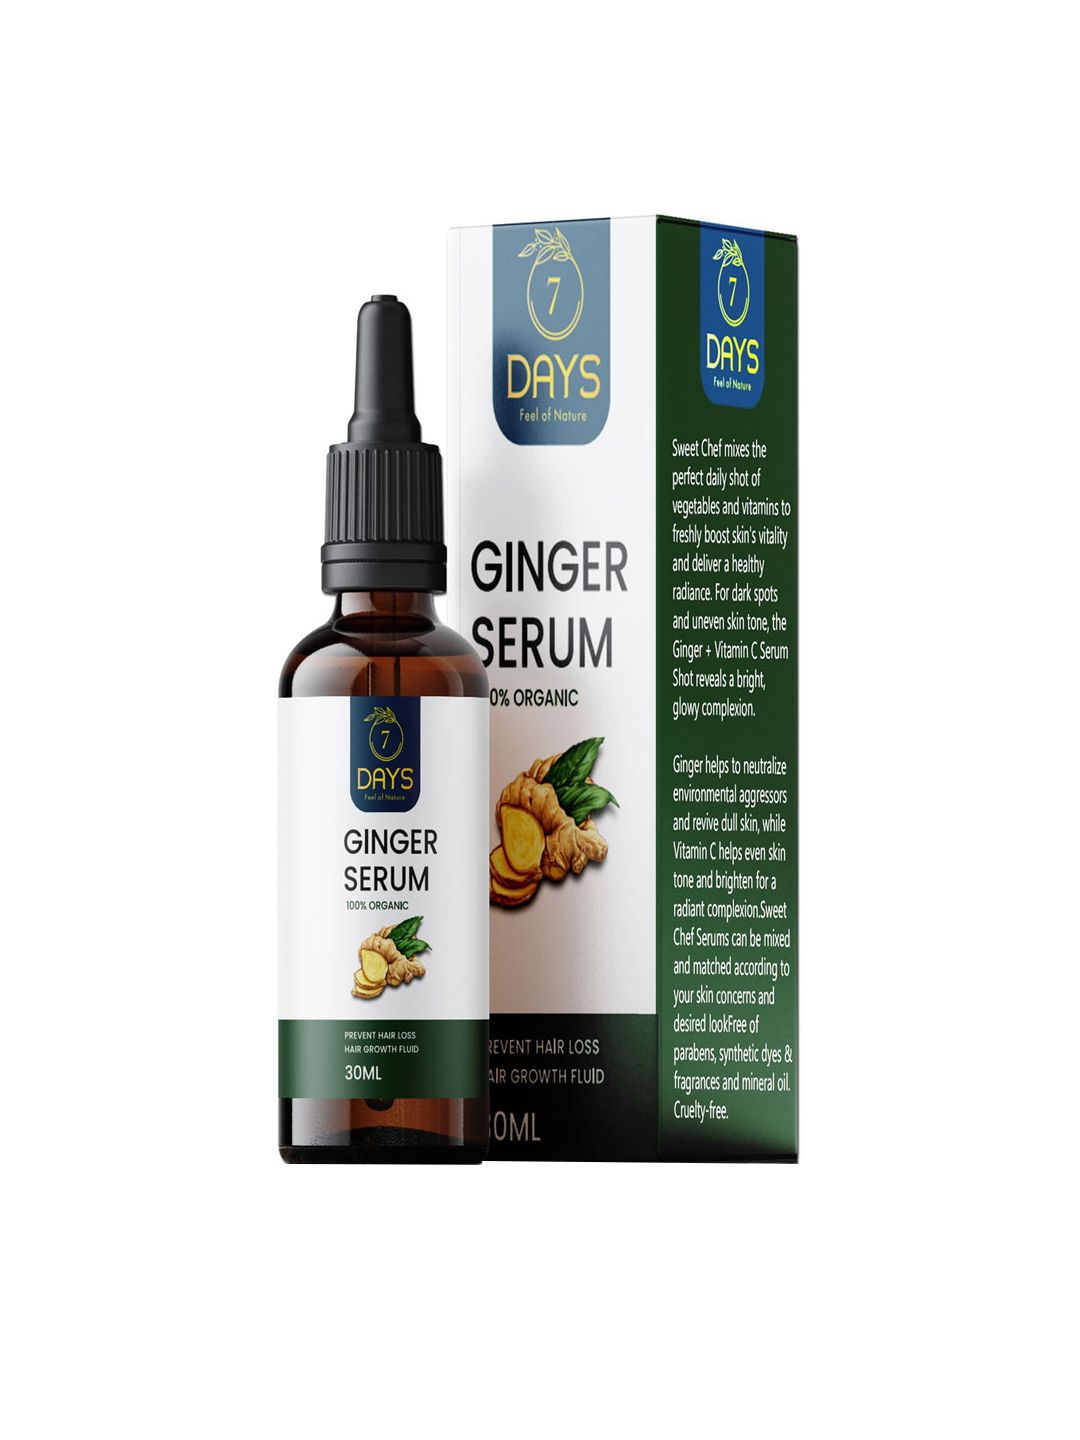 7 DAYS Organic Ginger Serum - Prevents Hair Loss - 30ml Price in India